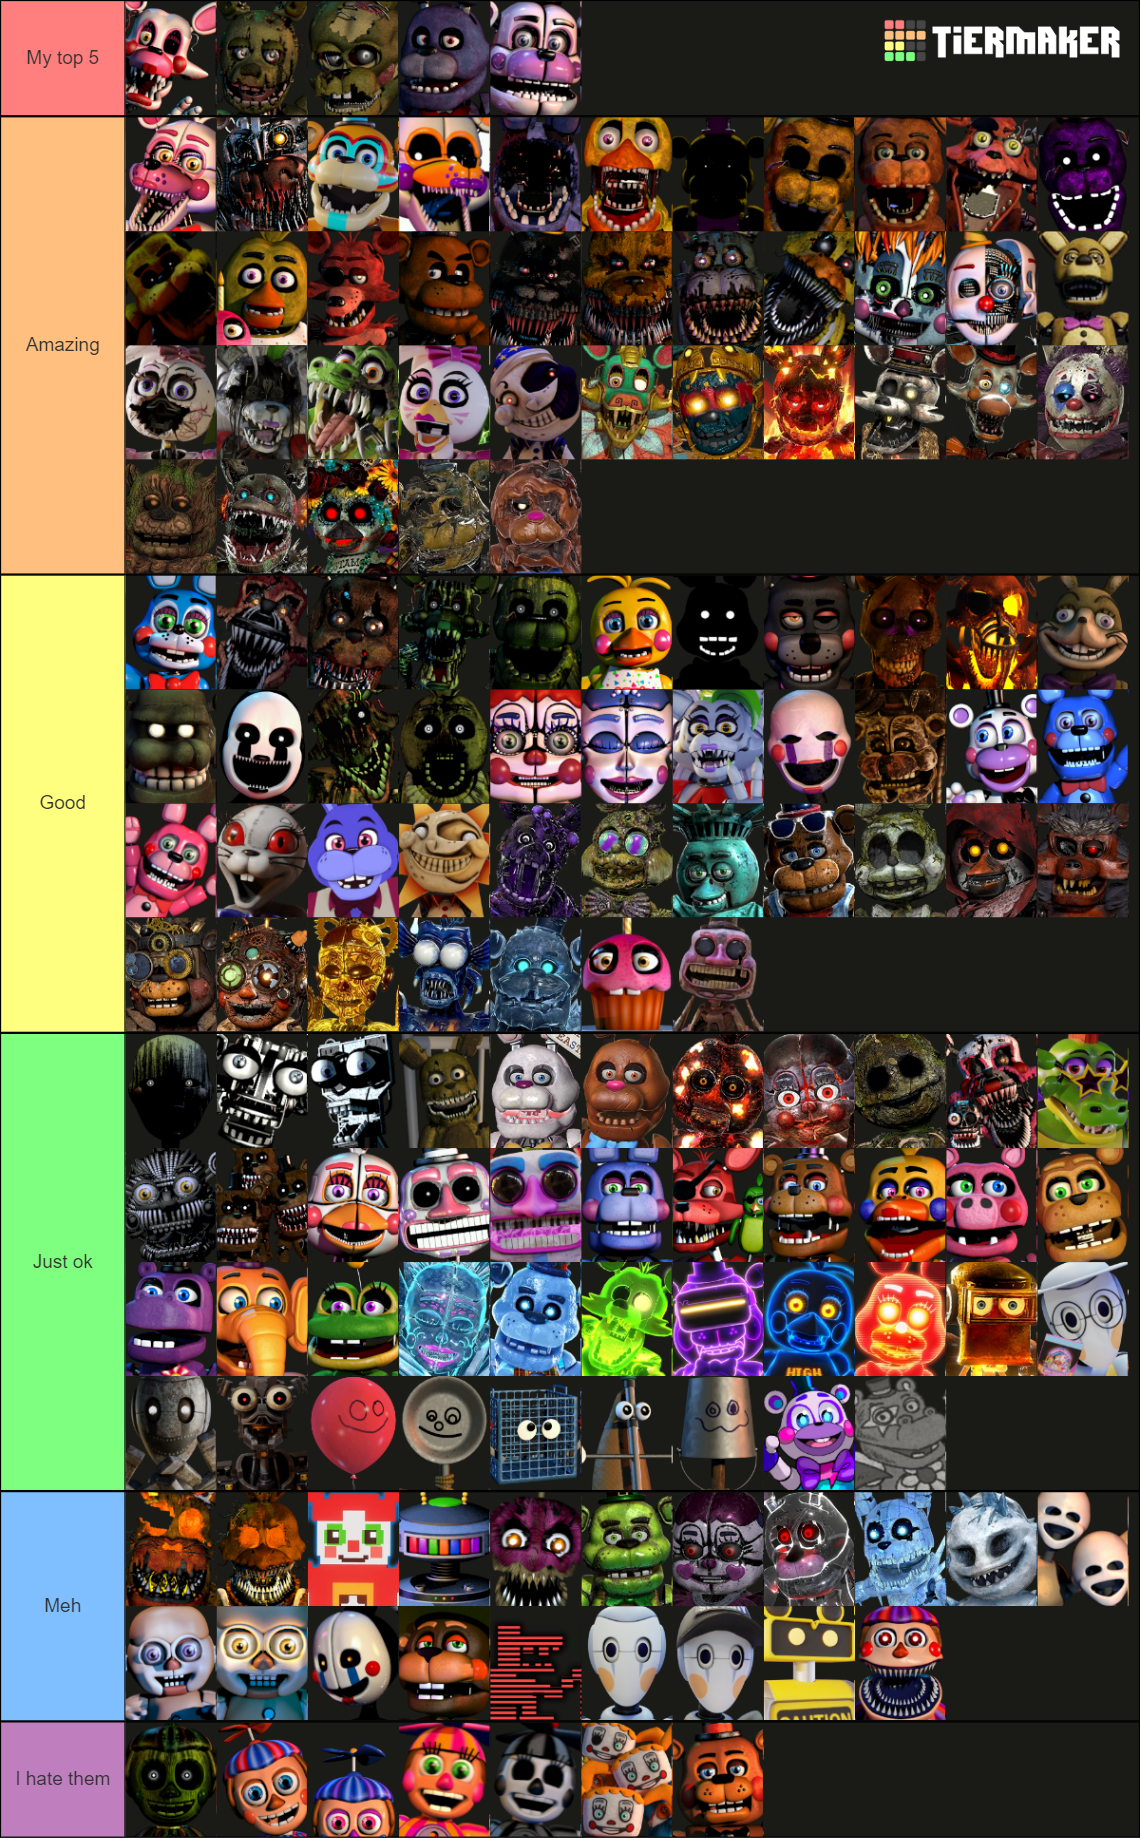 FNAF SECURITY BREACH CHARACTER TIER LIST 